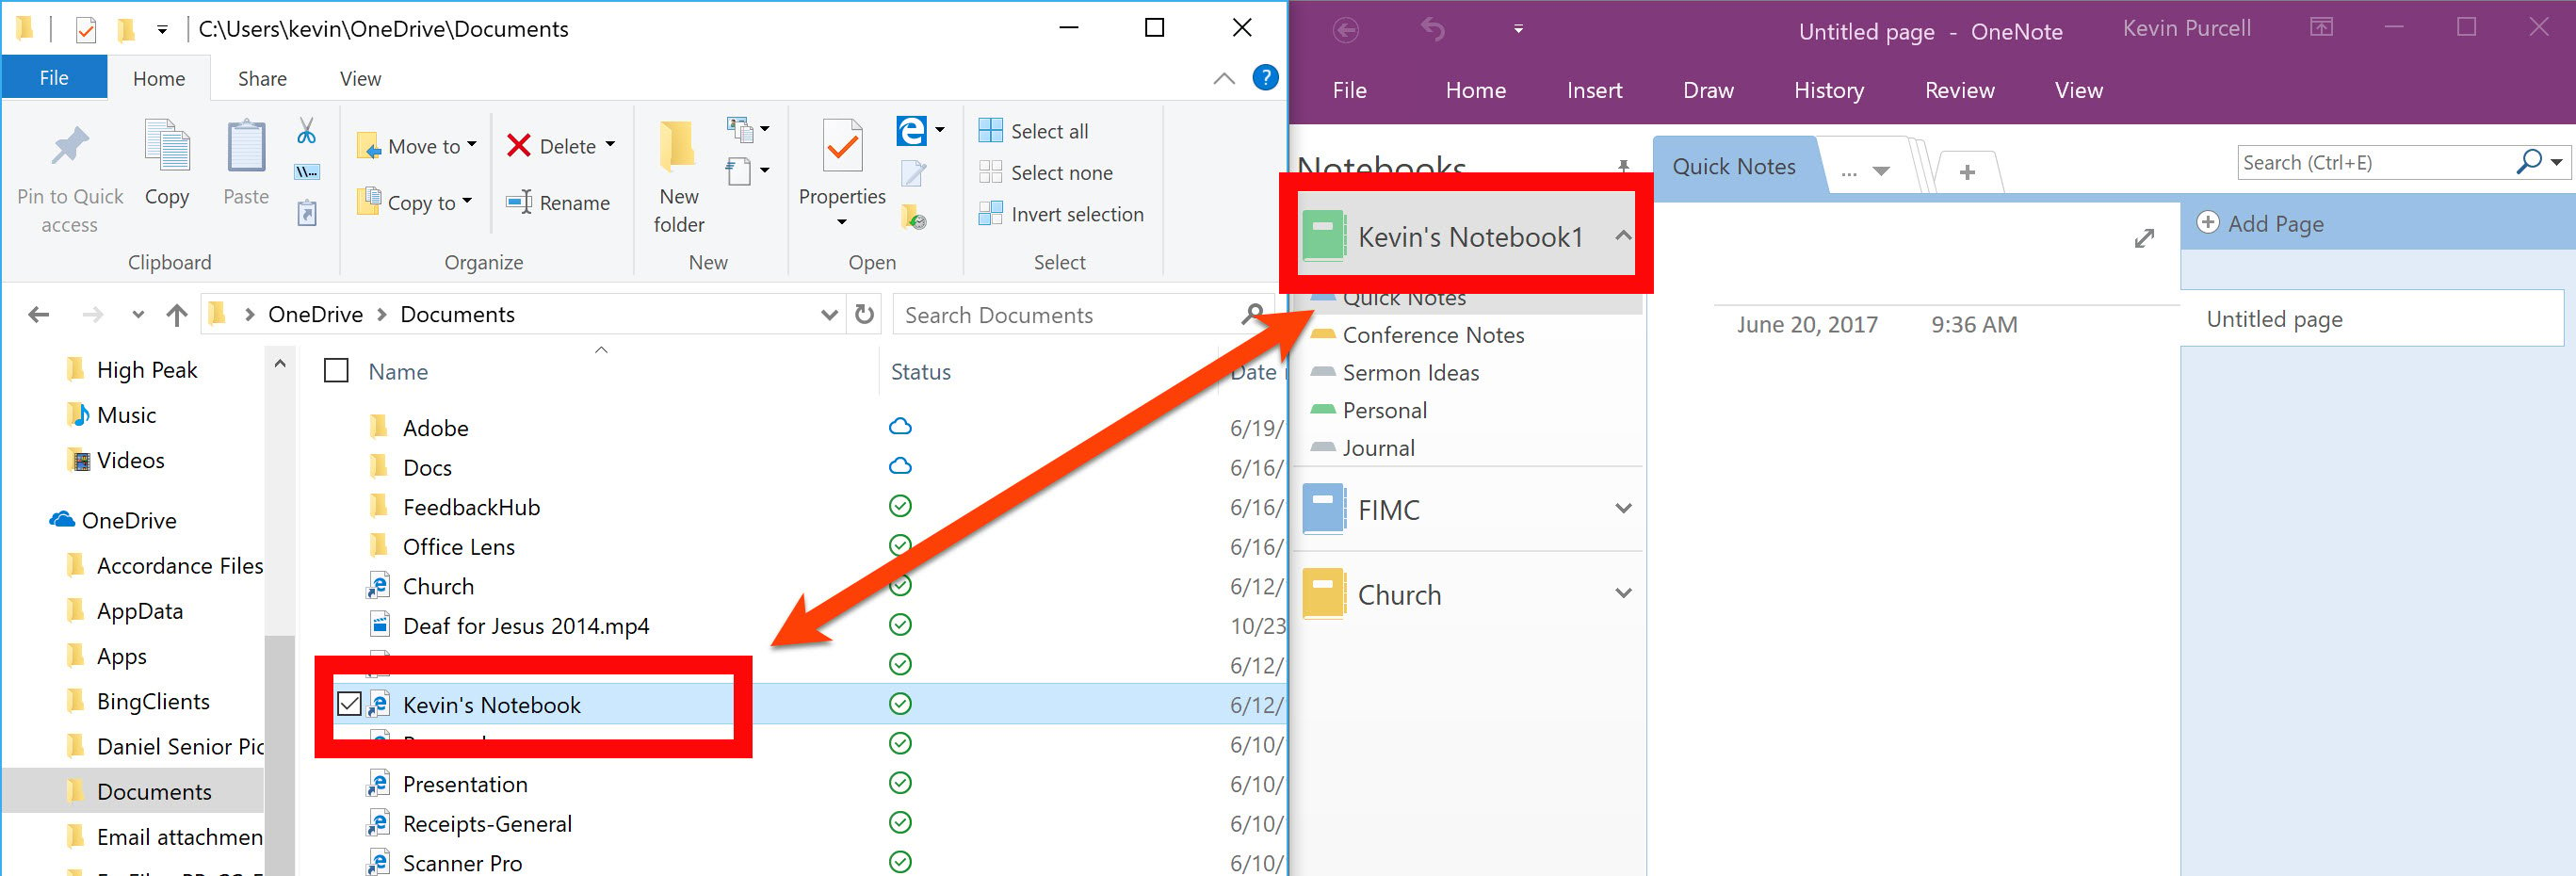 onenotebook file name changing